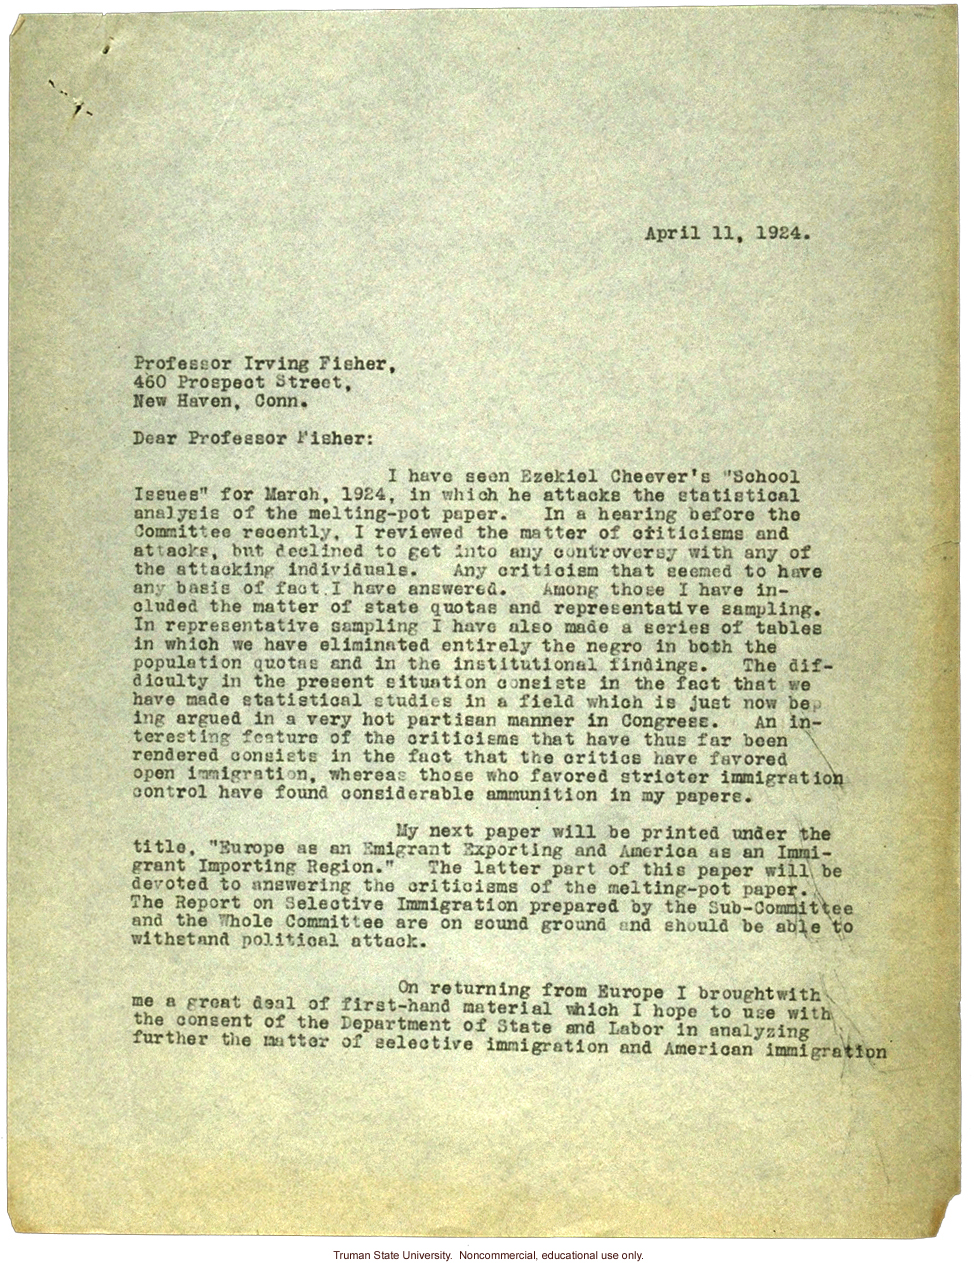 H. Laughlin's letter to I. Fisher in response to E. Cheever's criticisms of Laughlin's views on immigration